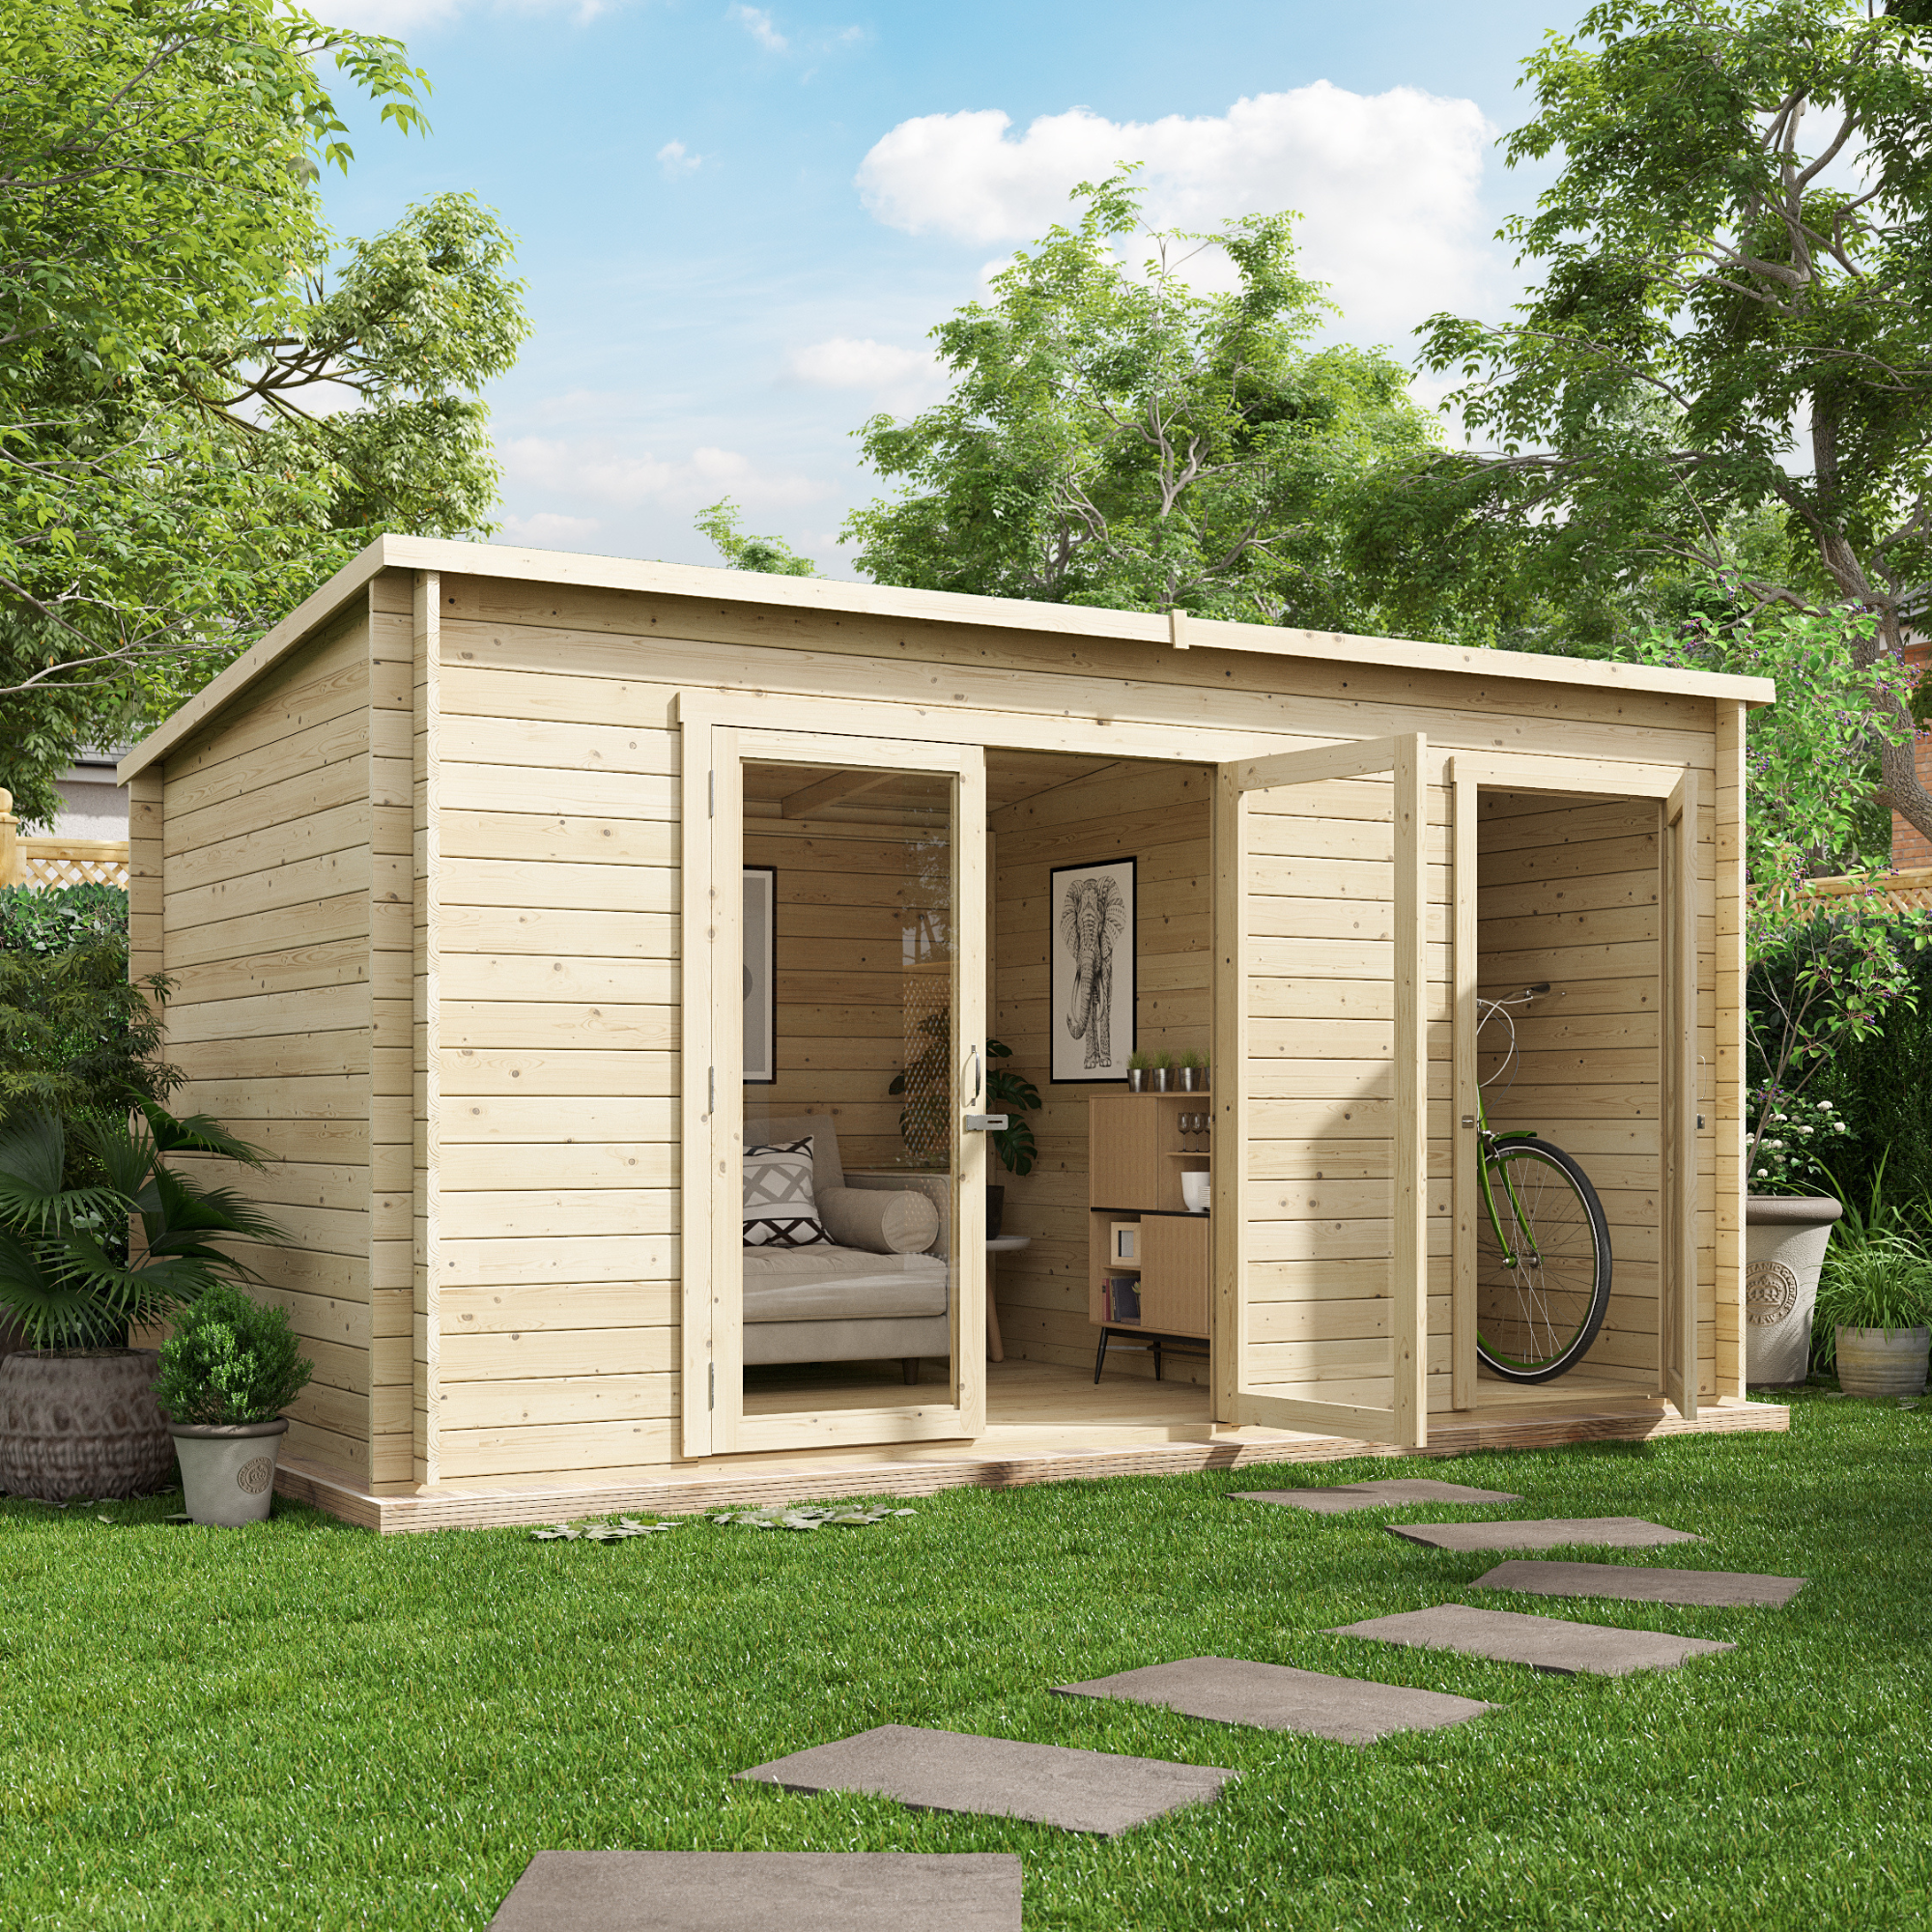 14 x 8 Log Cabin - BillyOh Tianna Log Cabin Summerhouse with Side Store - 28mm